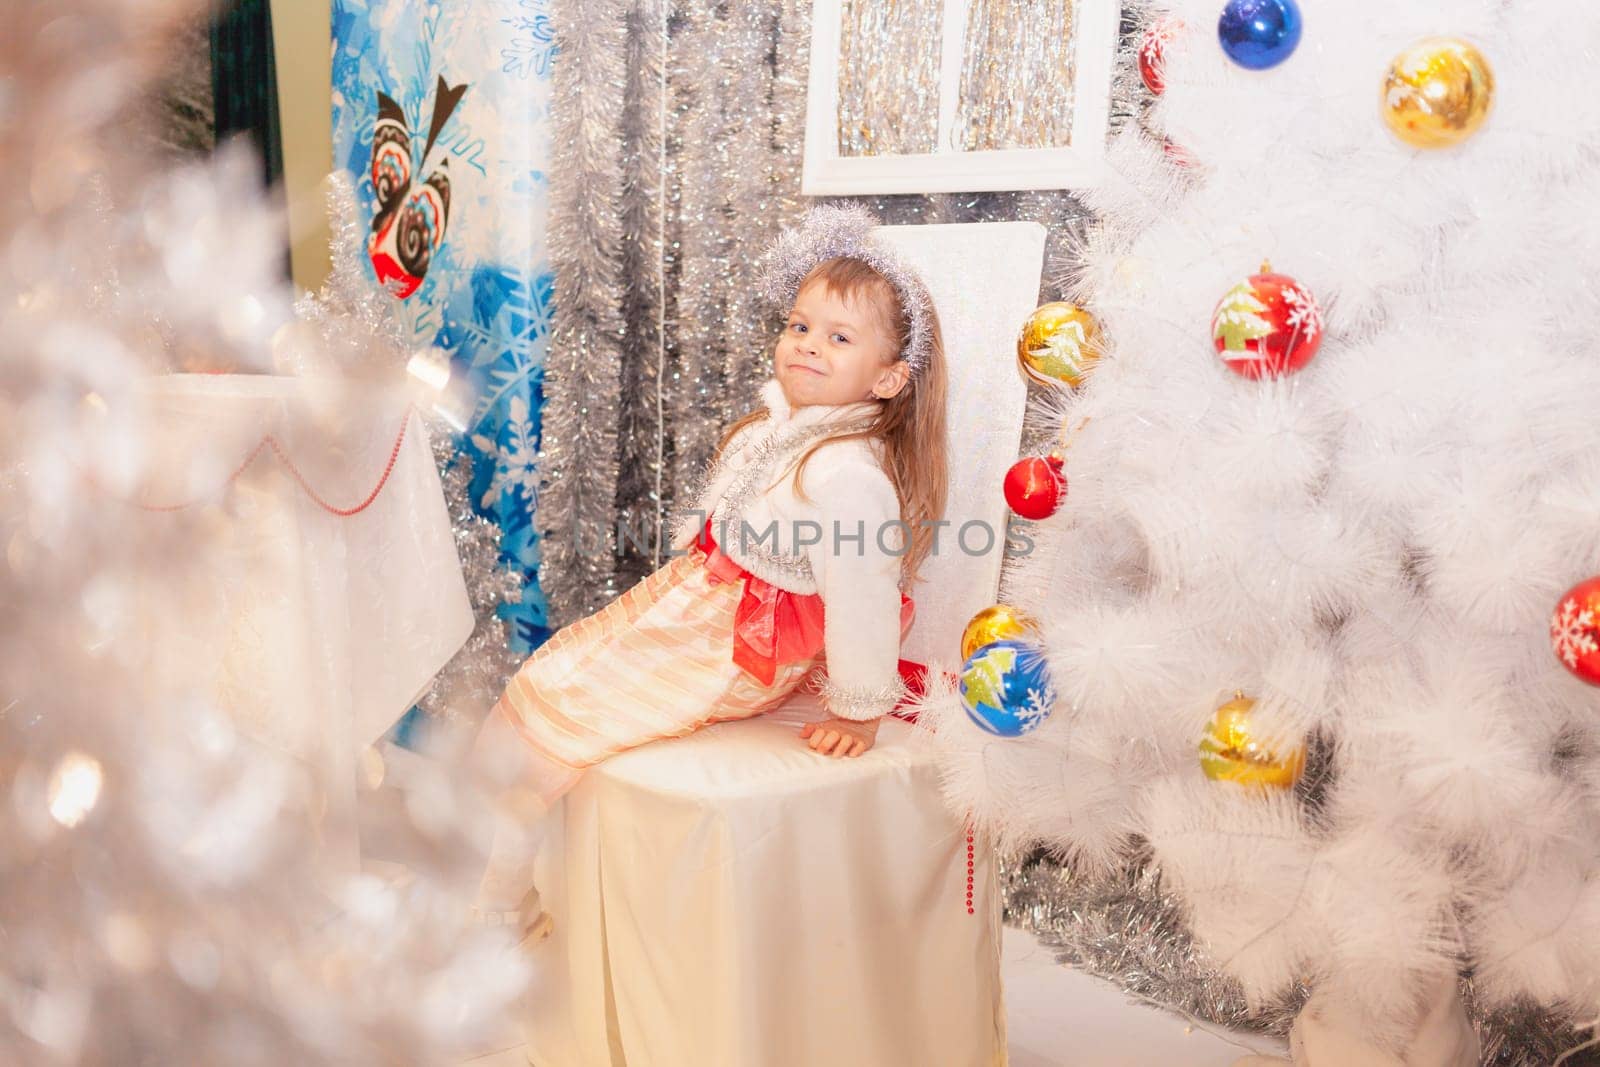 Girl in a New Year's dress near the Christmas tree. High quality photo